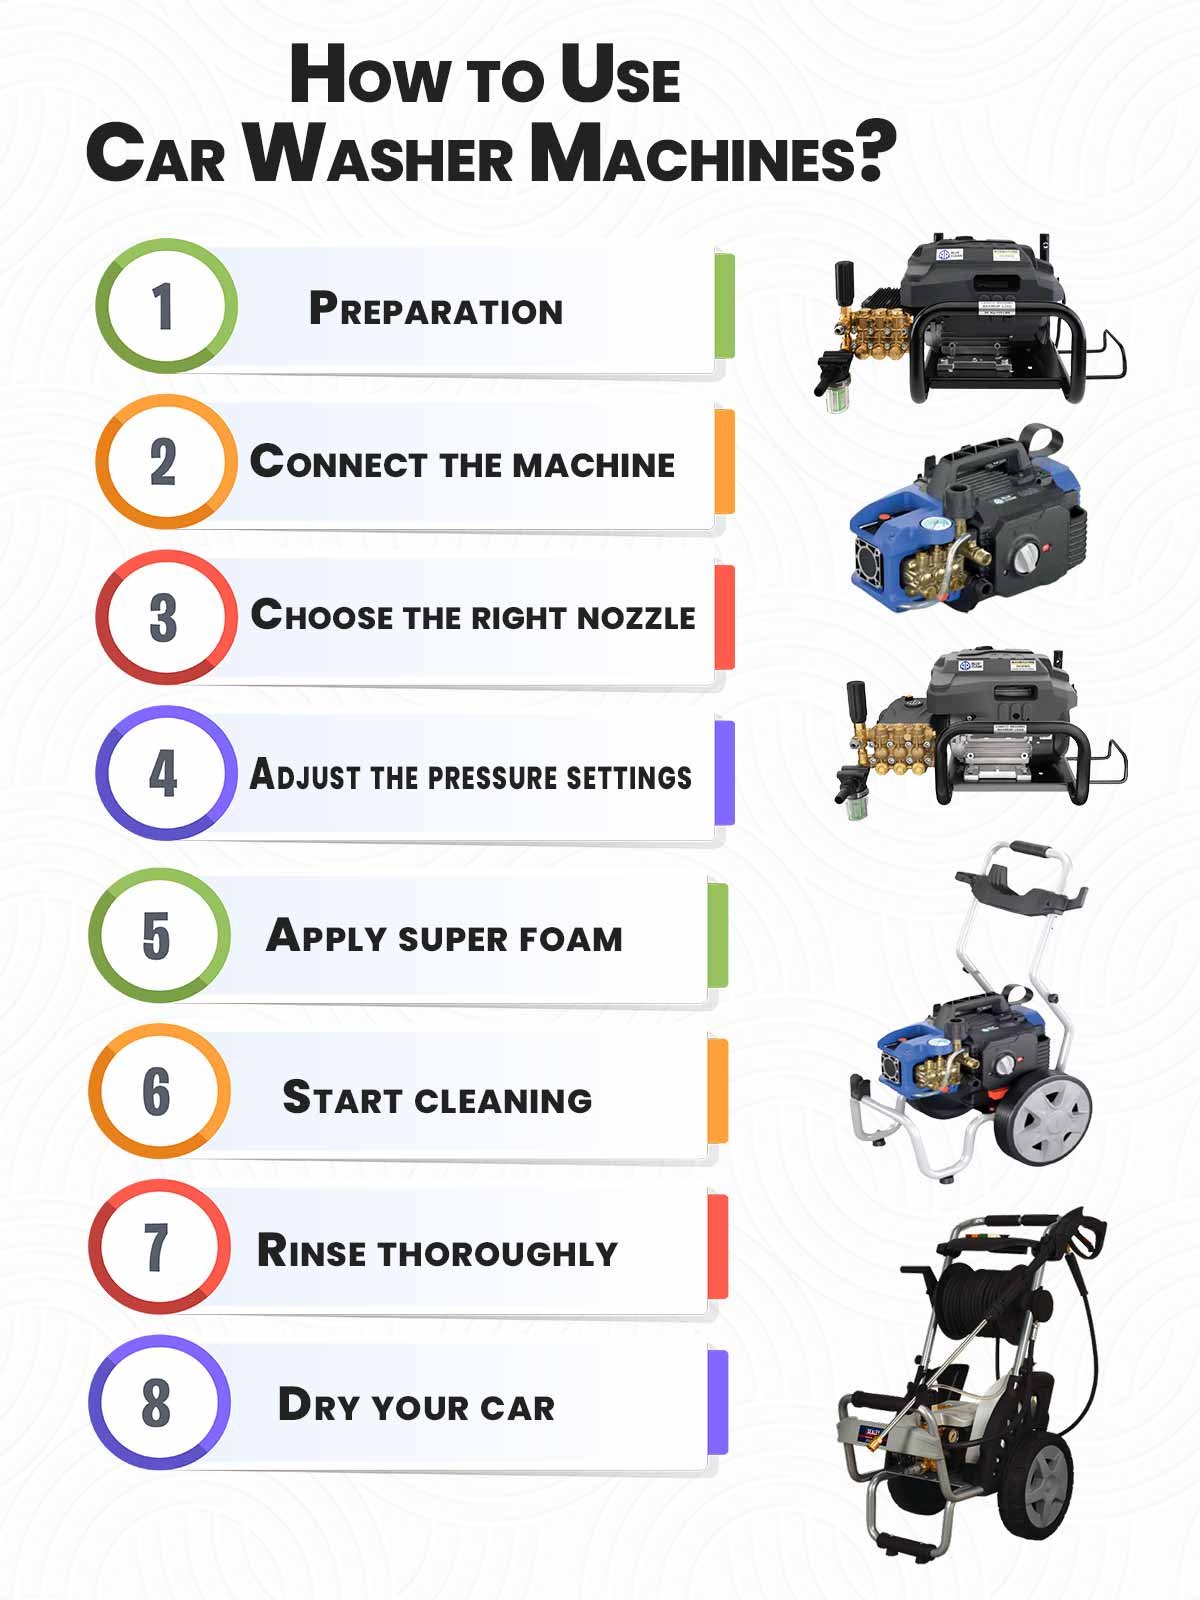 Follow step-by-step guide on how to use a car washer machine effectively